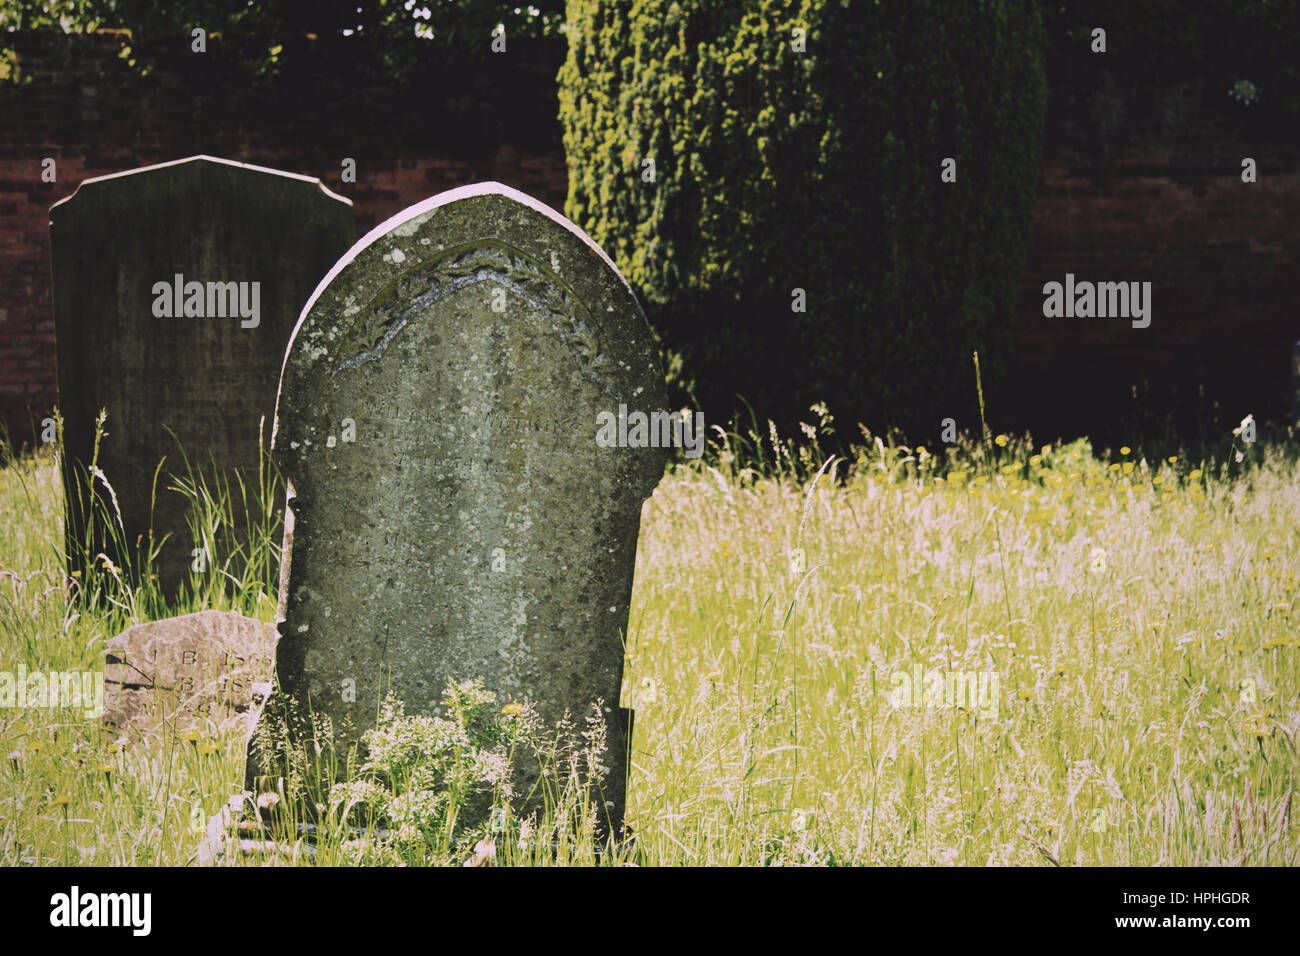 Grave stones outside a church in Beaconsfield, Buckinghamshire, England Vintage Retro Filter. Stock Photo